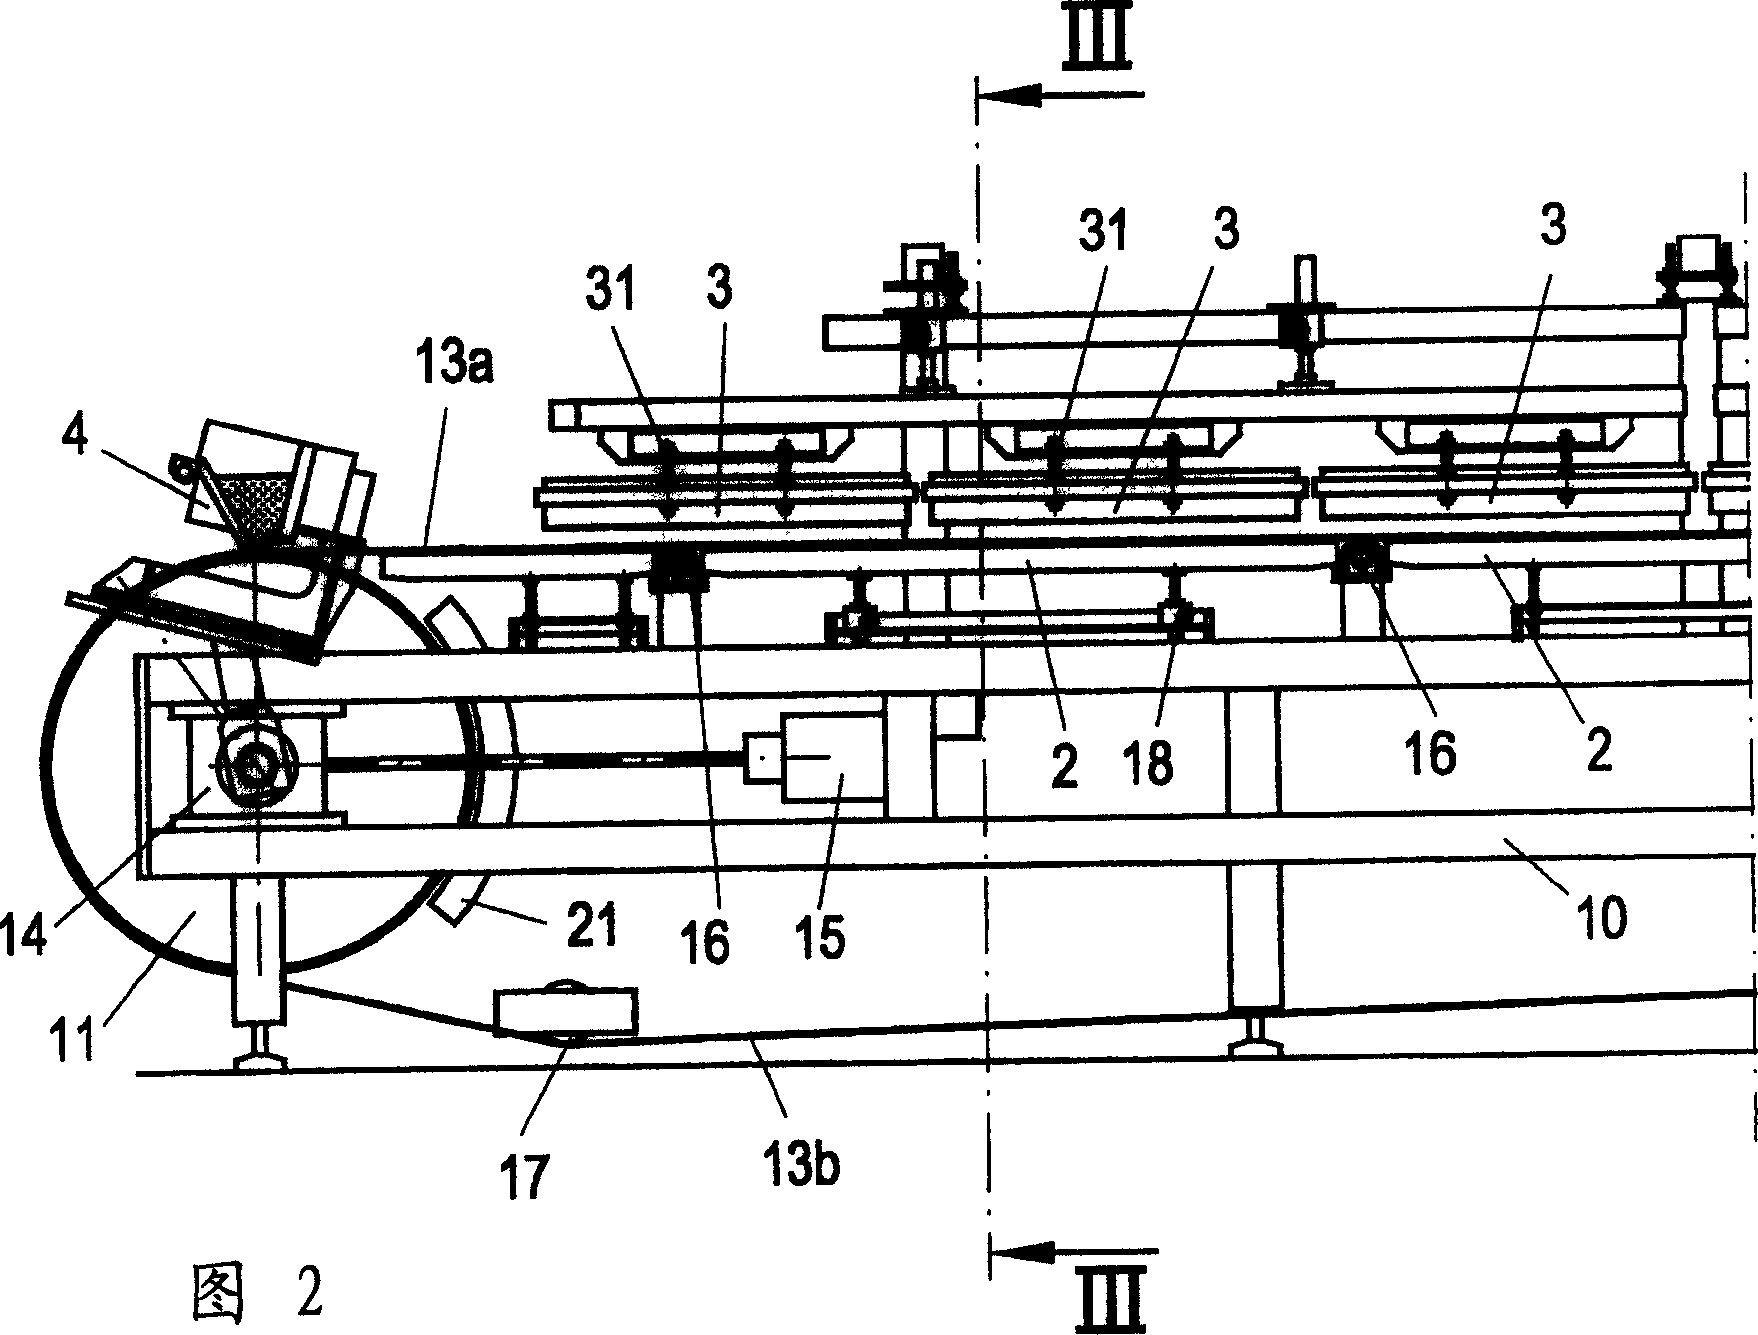 Apparatus for the heat treatment of foodstuffs and feedstuffs, in particular for the production of bakery products